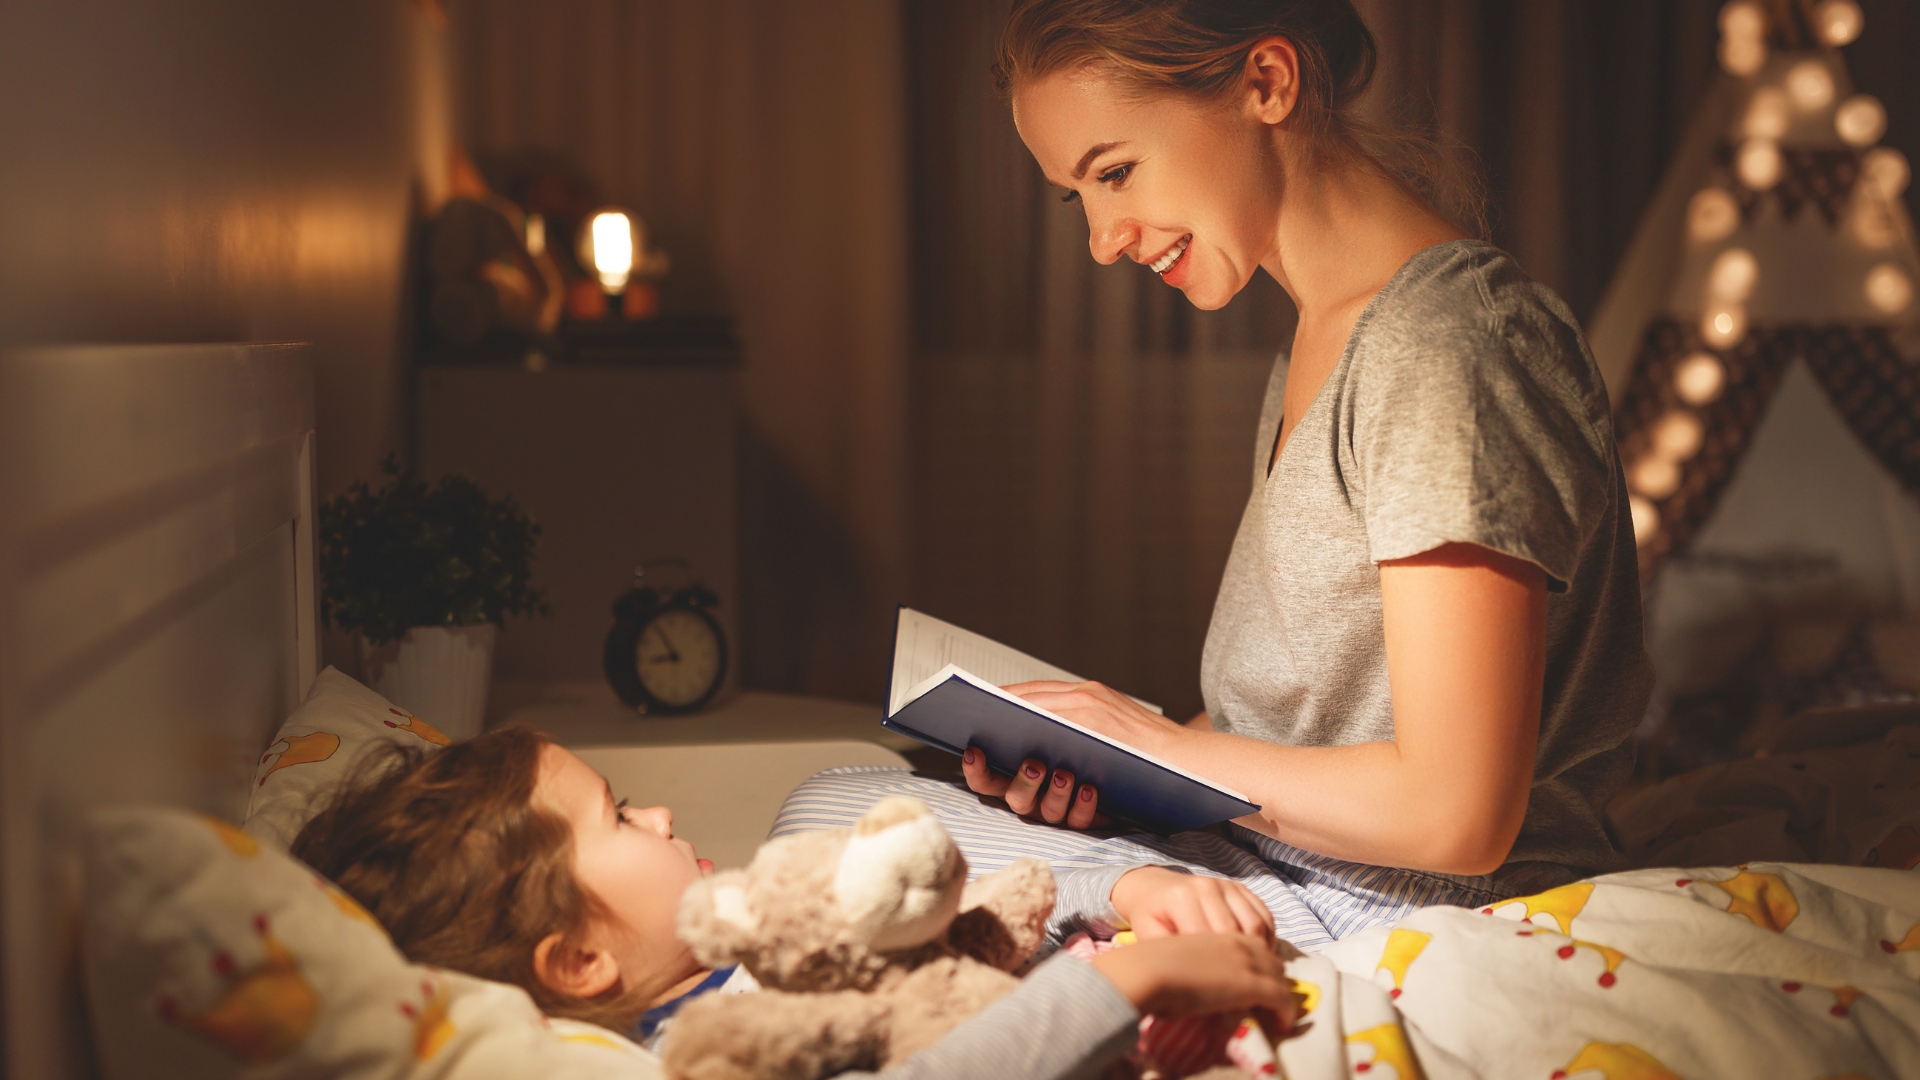 A mother reading a story to her child during bedtime via Canva.